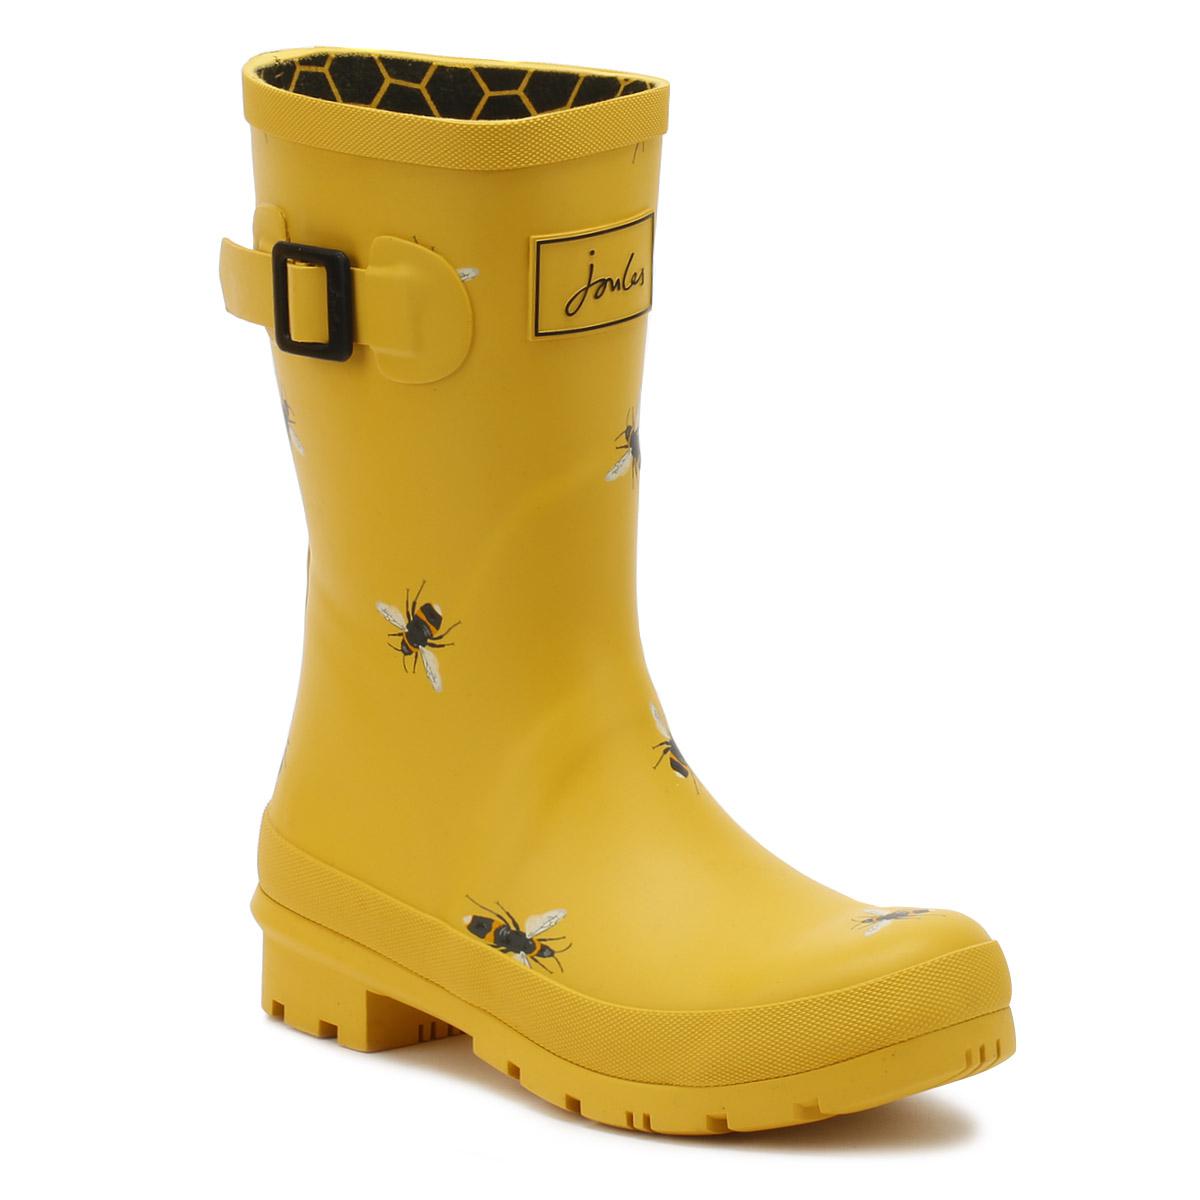 Joules Womens Molly Welly Rain Boot